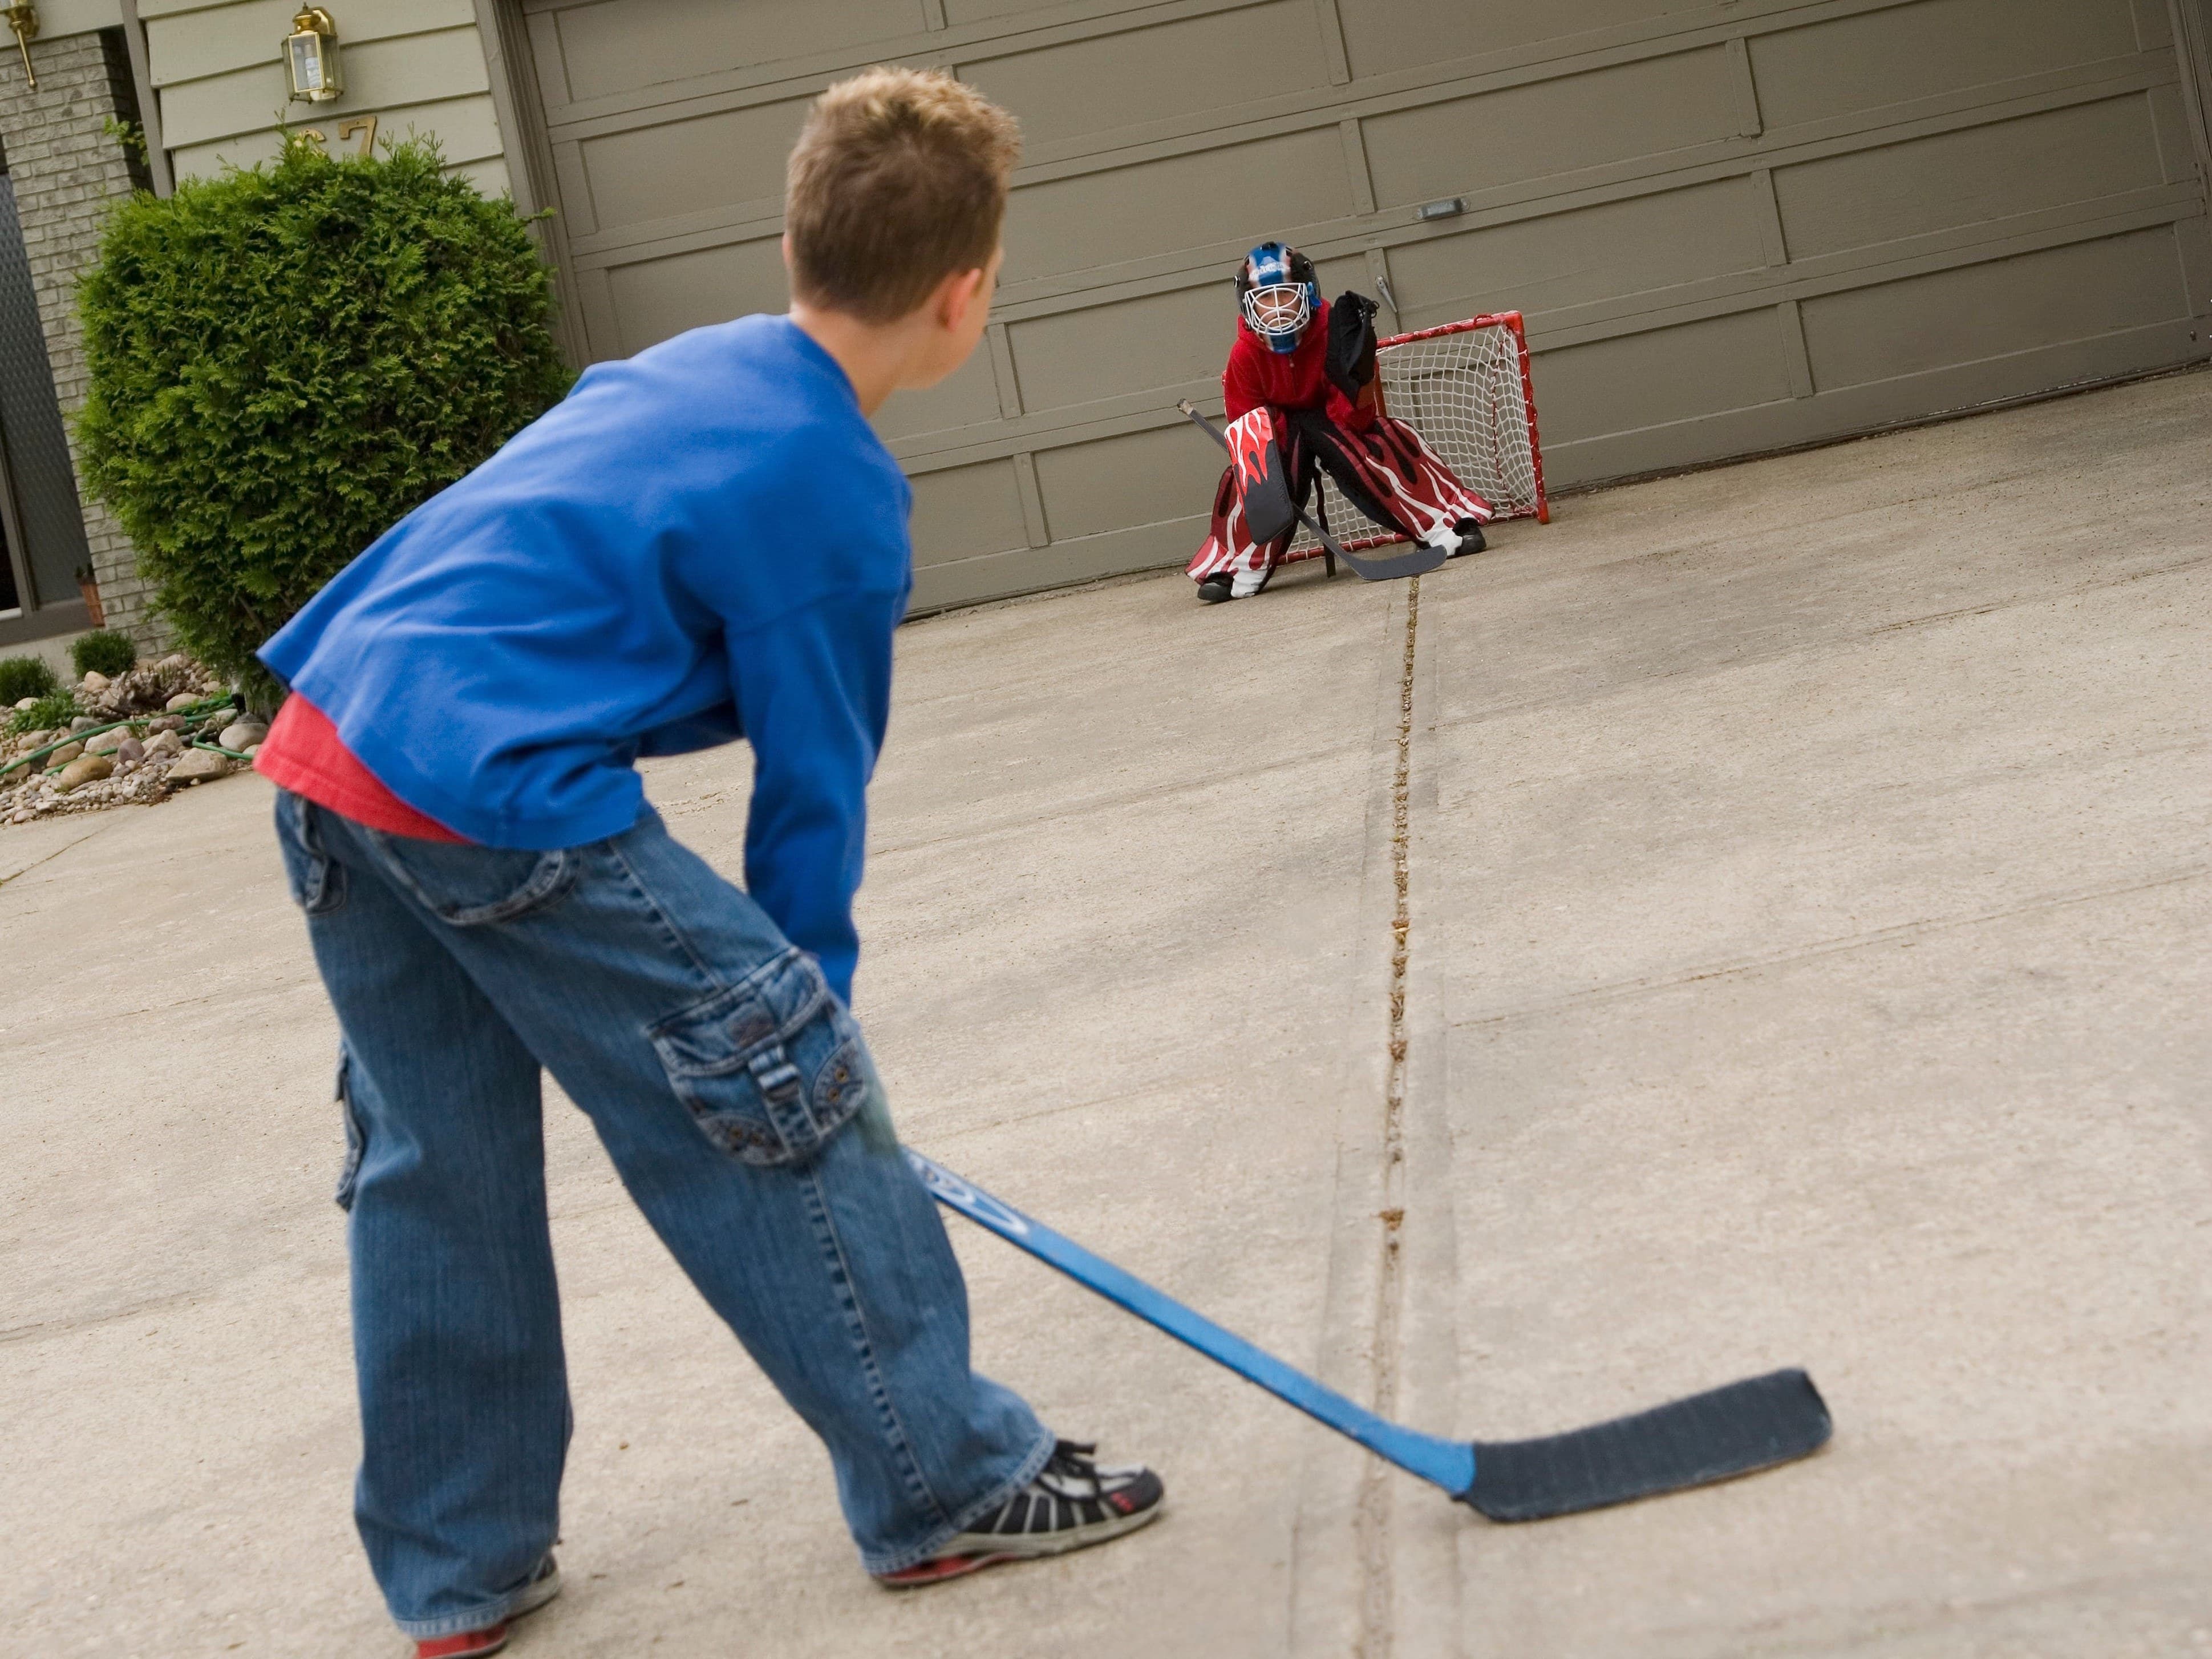 kids playing hockey in driveway with net up against garage door